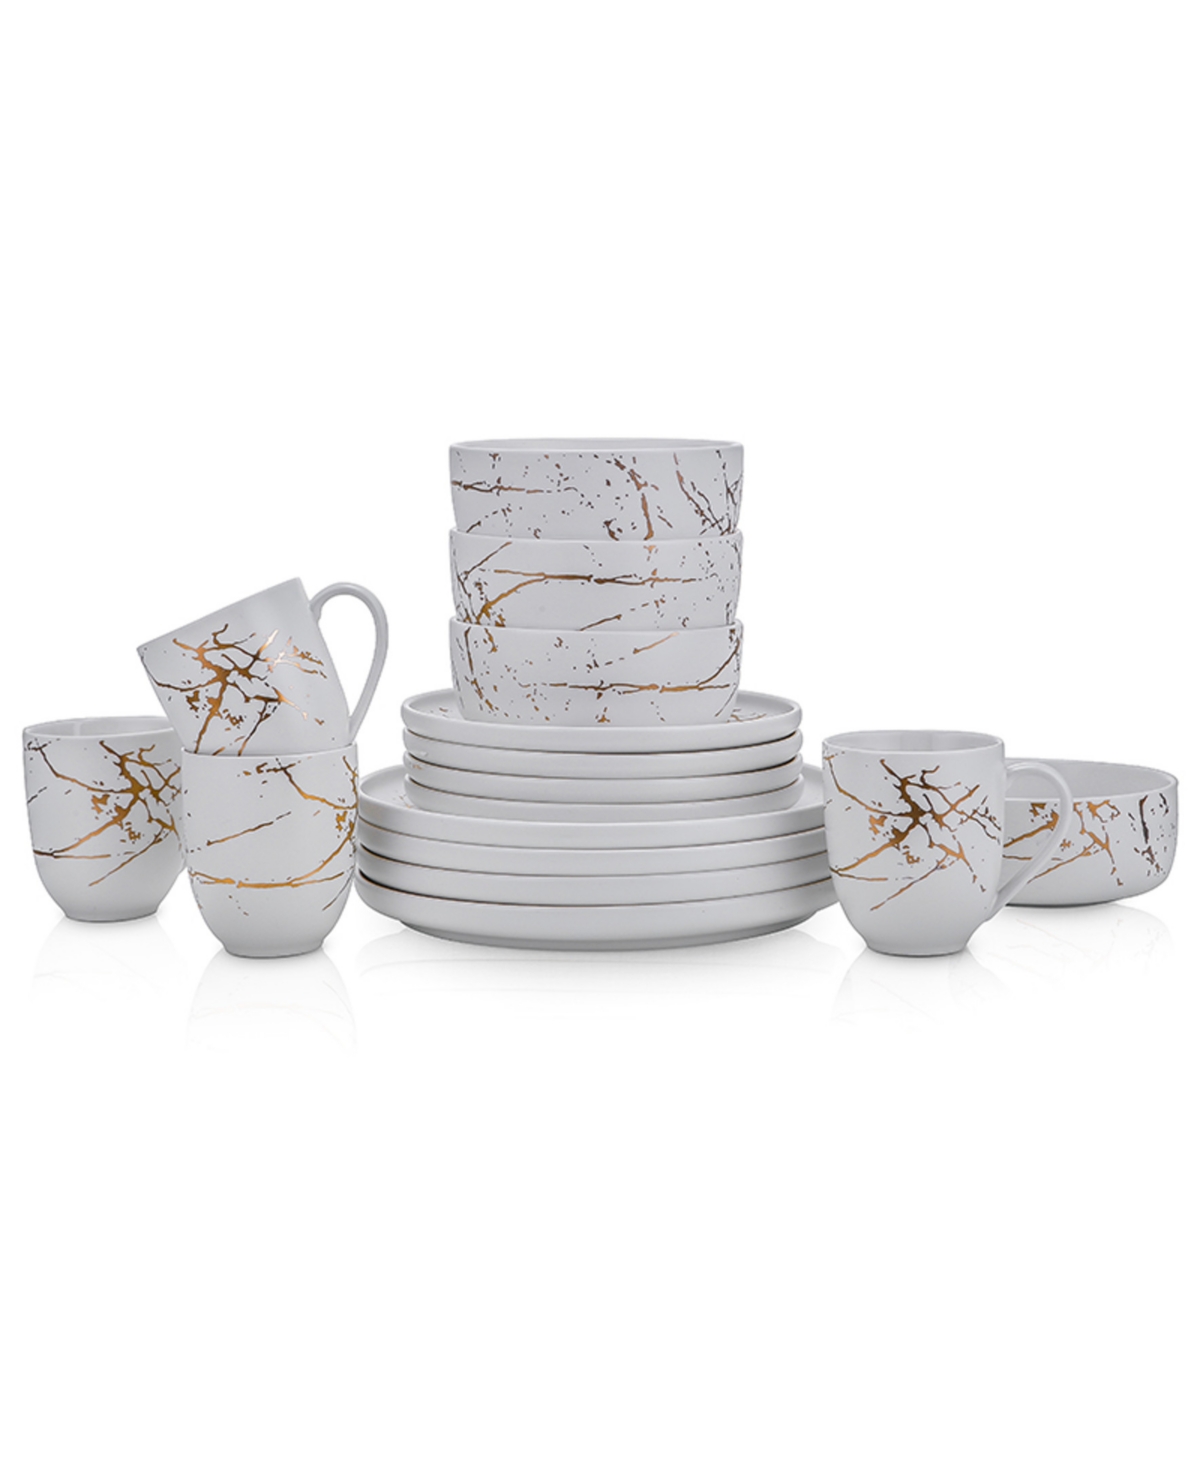 Zora 16 Pieces Dinnerware Set, Service For 4 - White and Gold